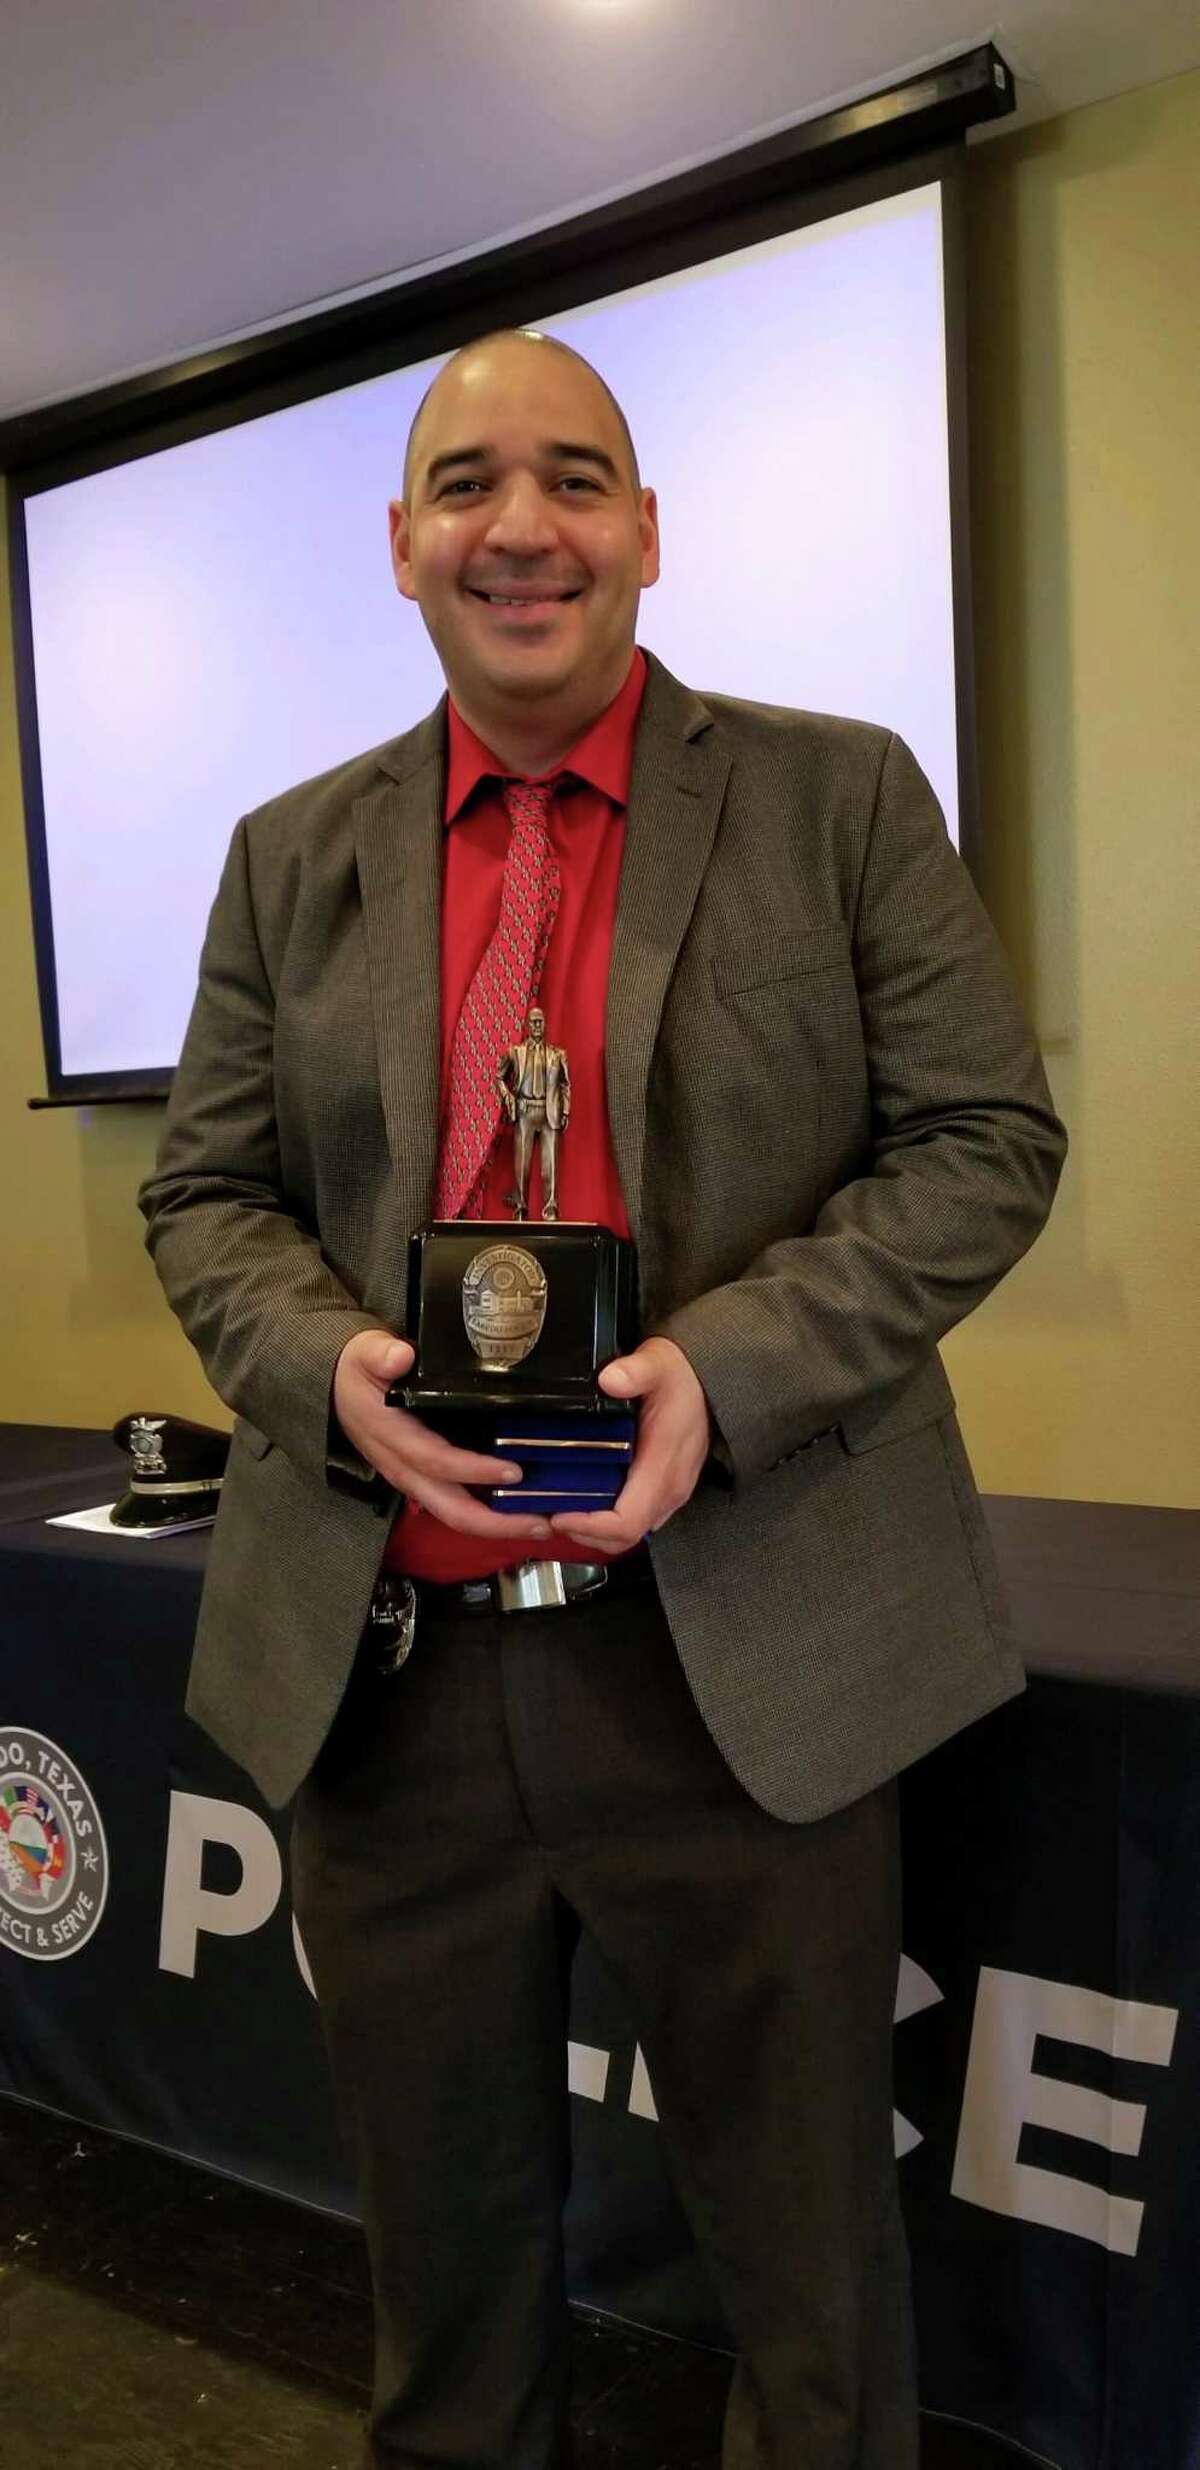 Investigator Andres Perez was honored as the Investigator of the Year.